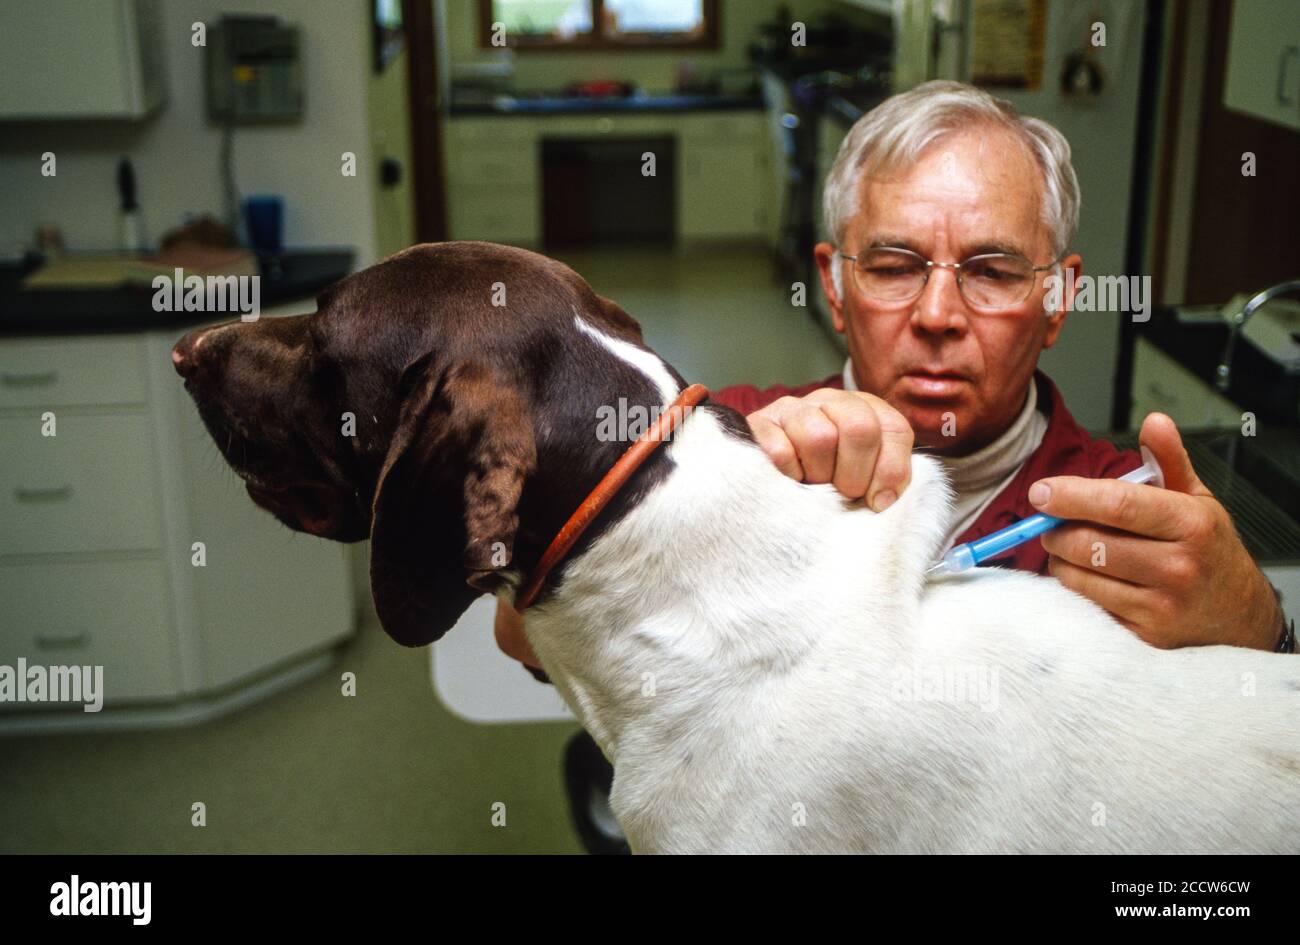 Microchip Insertion in Dog by Veterinarian, to ensure proper identification of animal if lost.  Dyersville, Iowa, USA. Stock Photo